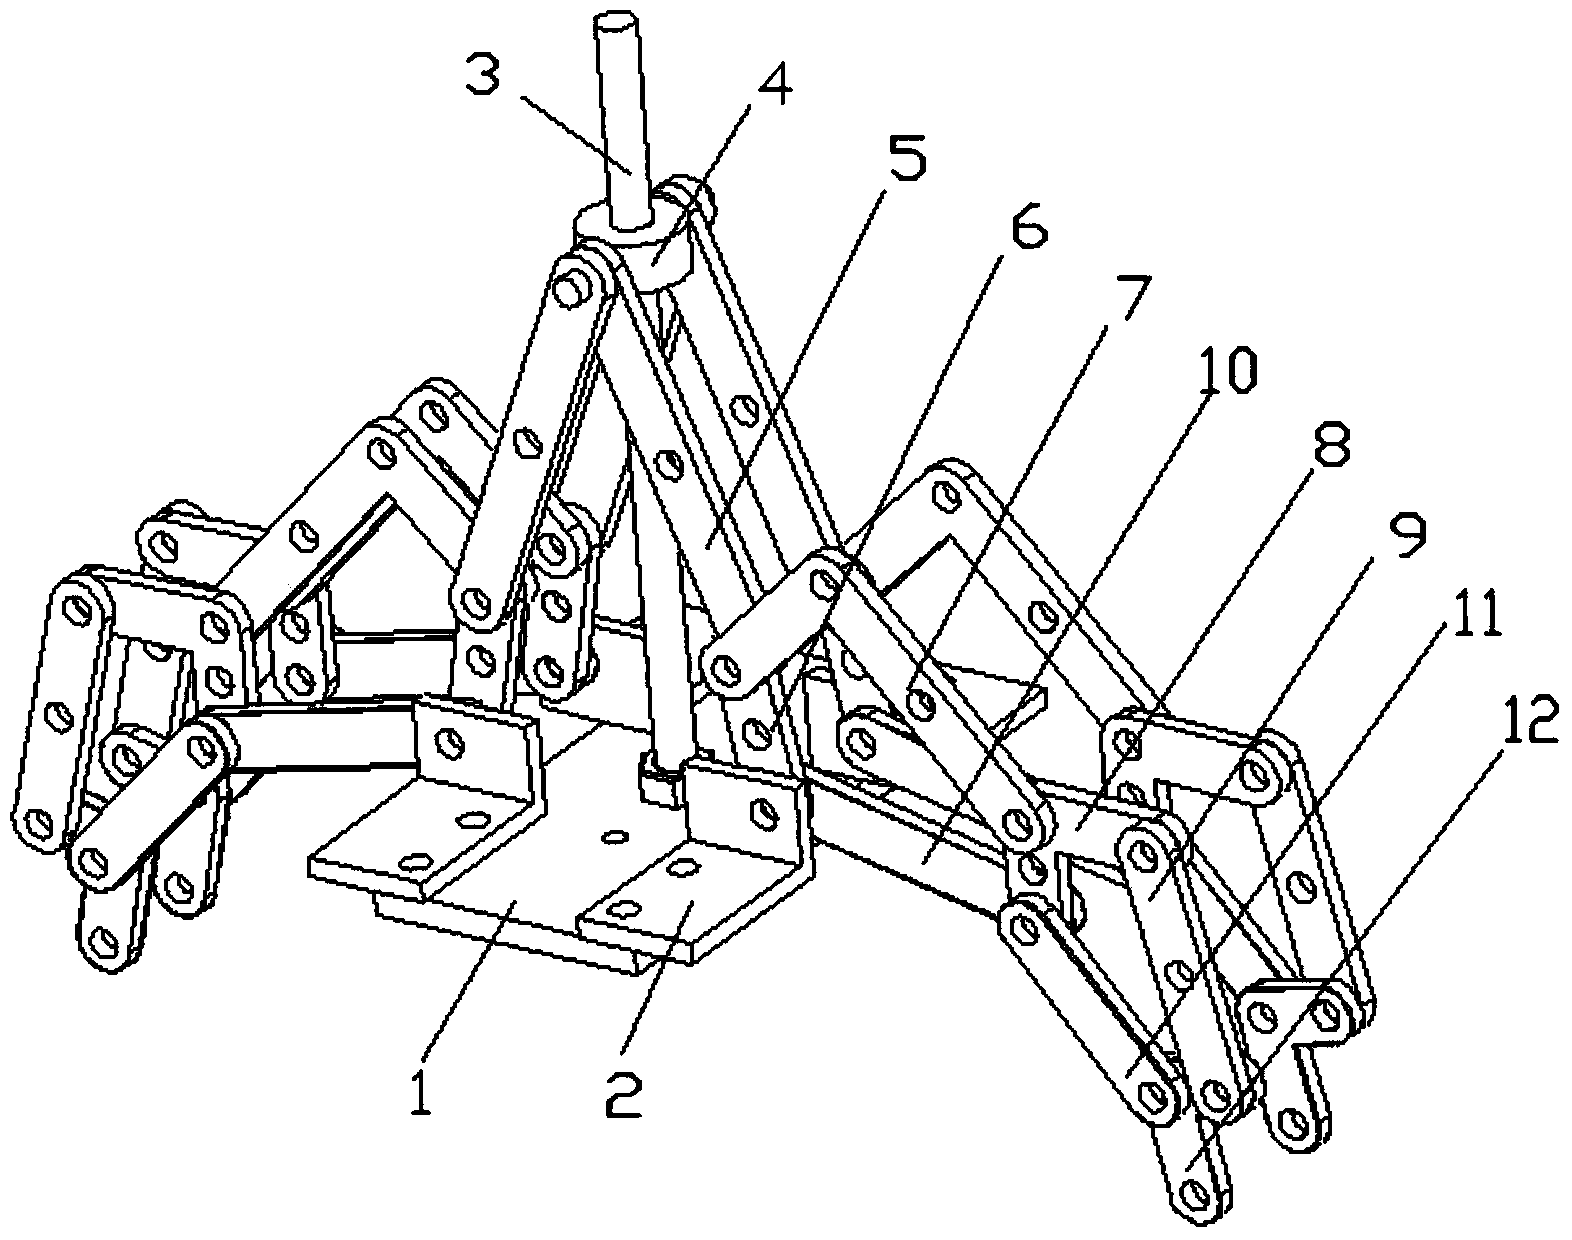 Under-actuated self-adaptive mechanical arm